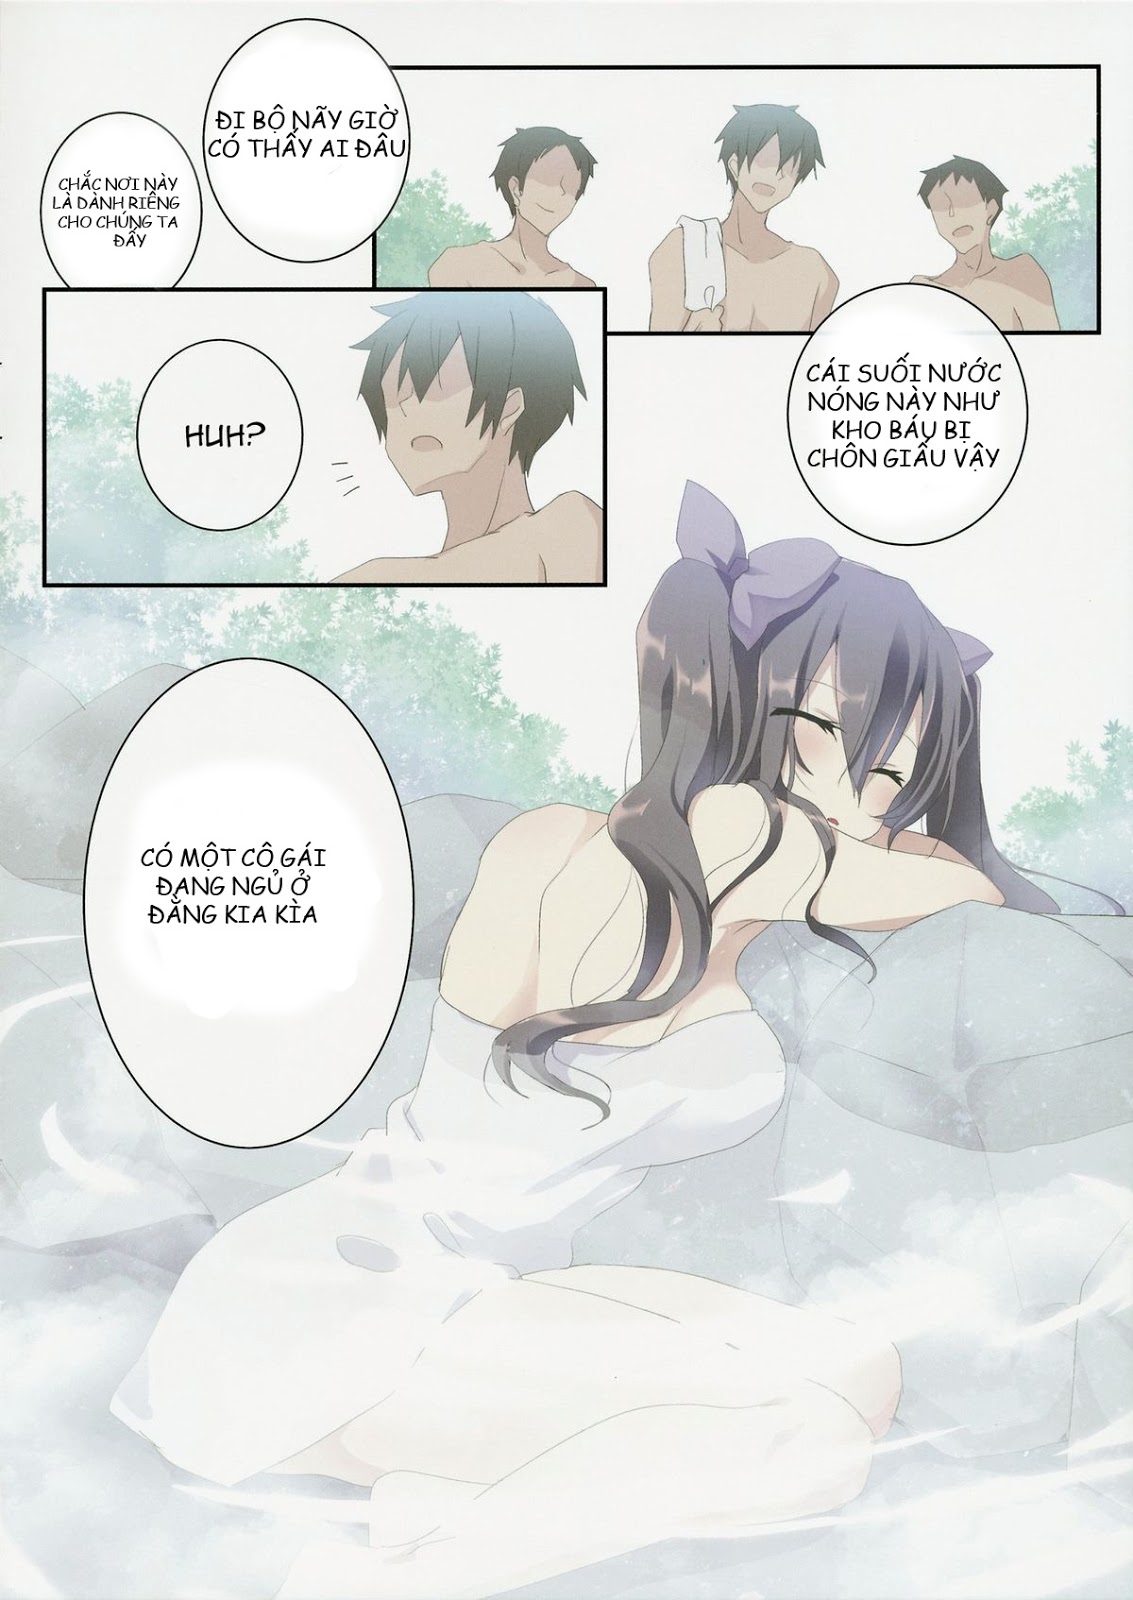 (Reitaisai 12) [NERCO (Koikawa Minoru)] Hatate in Tennen Onsen | Hatate in Natural Hot Spring (Touhou Project) [Vietnamese Tiếng Việt] [LXERS] 2